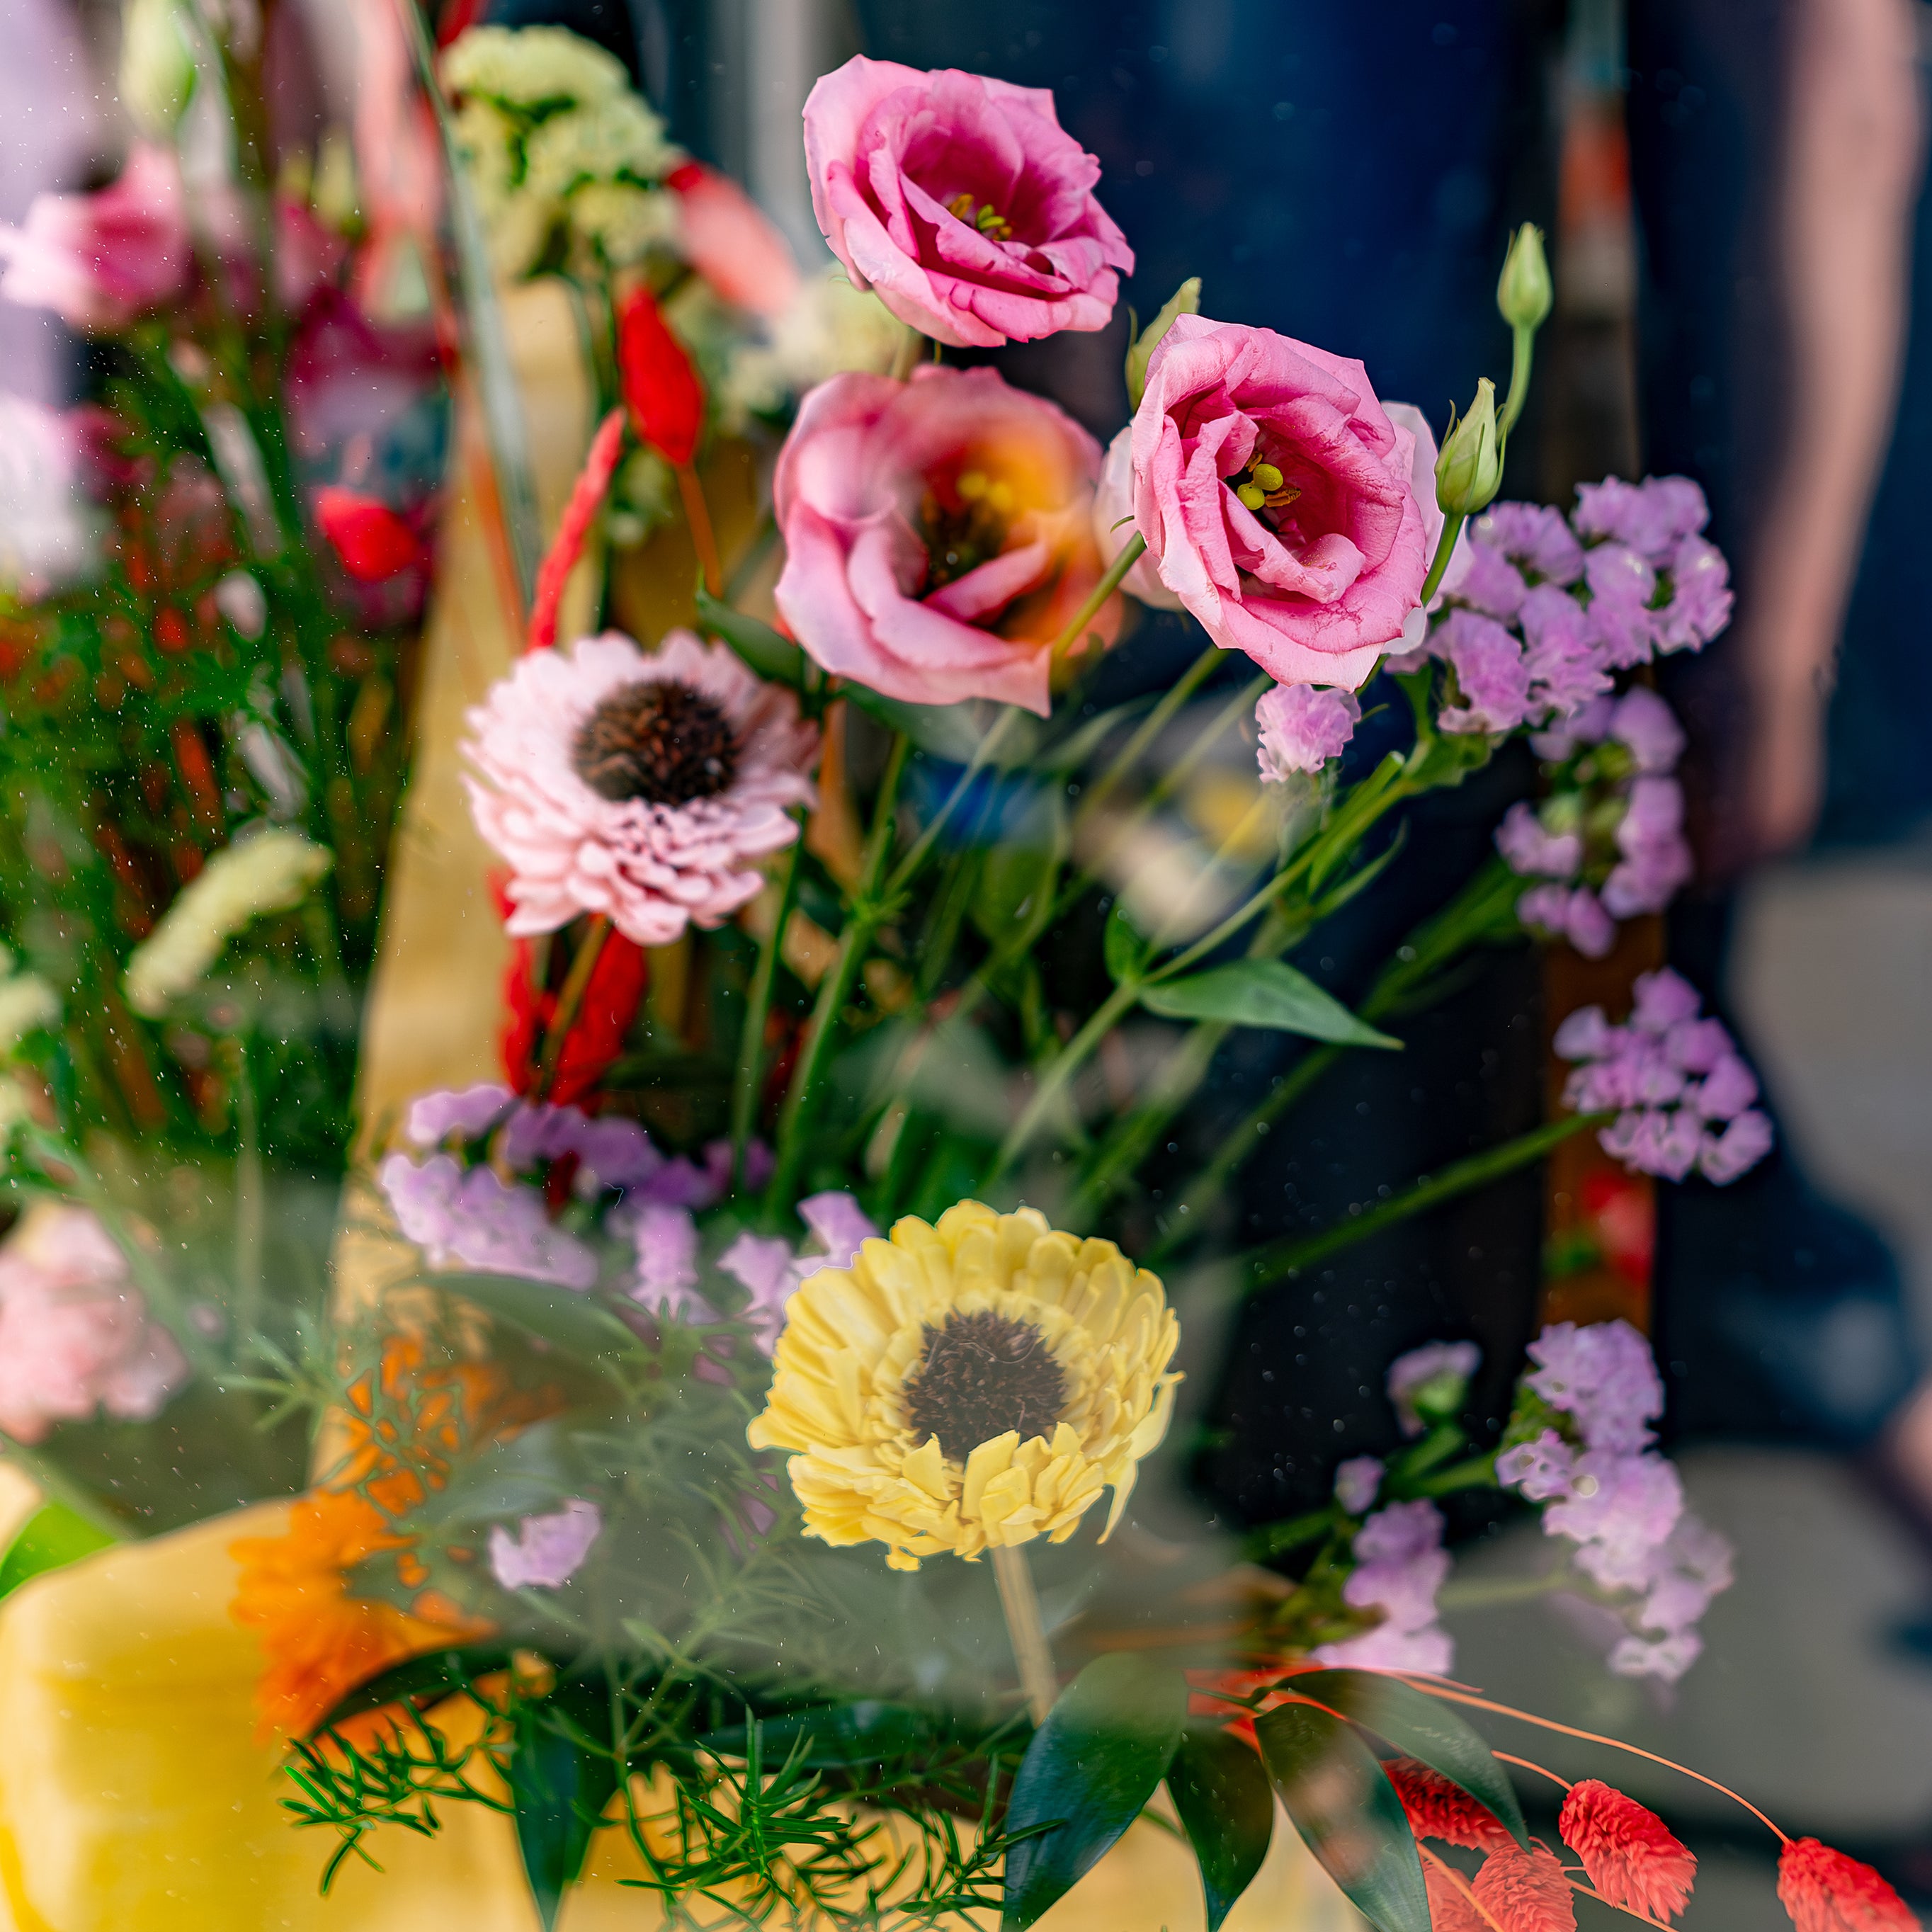 A stunning floral arrangement by Amaranté London featuring pink lisianthus, yellow gerbera daisies, and various greenery, showcased in a vibrant and fresh display at the Vilebrequin store during Chelsea in Bloom.